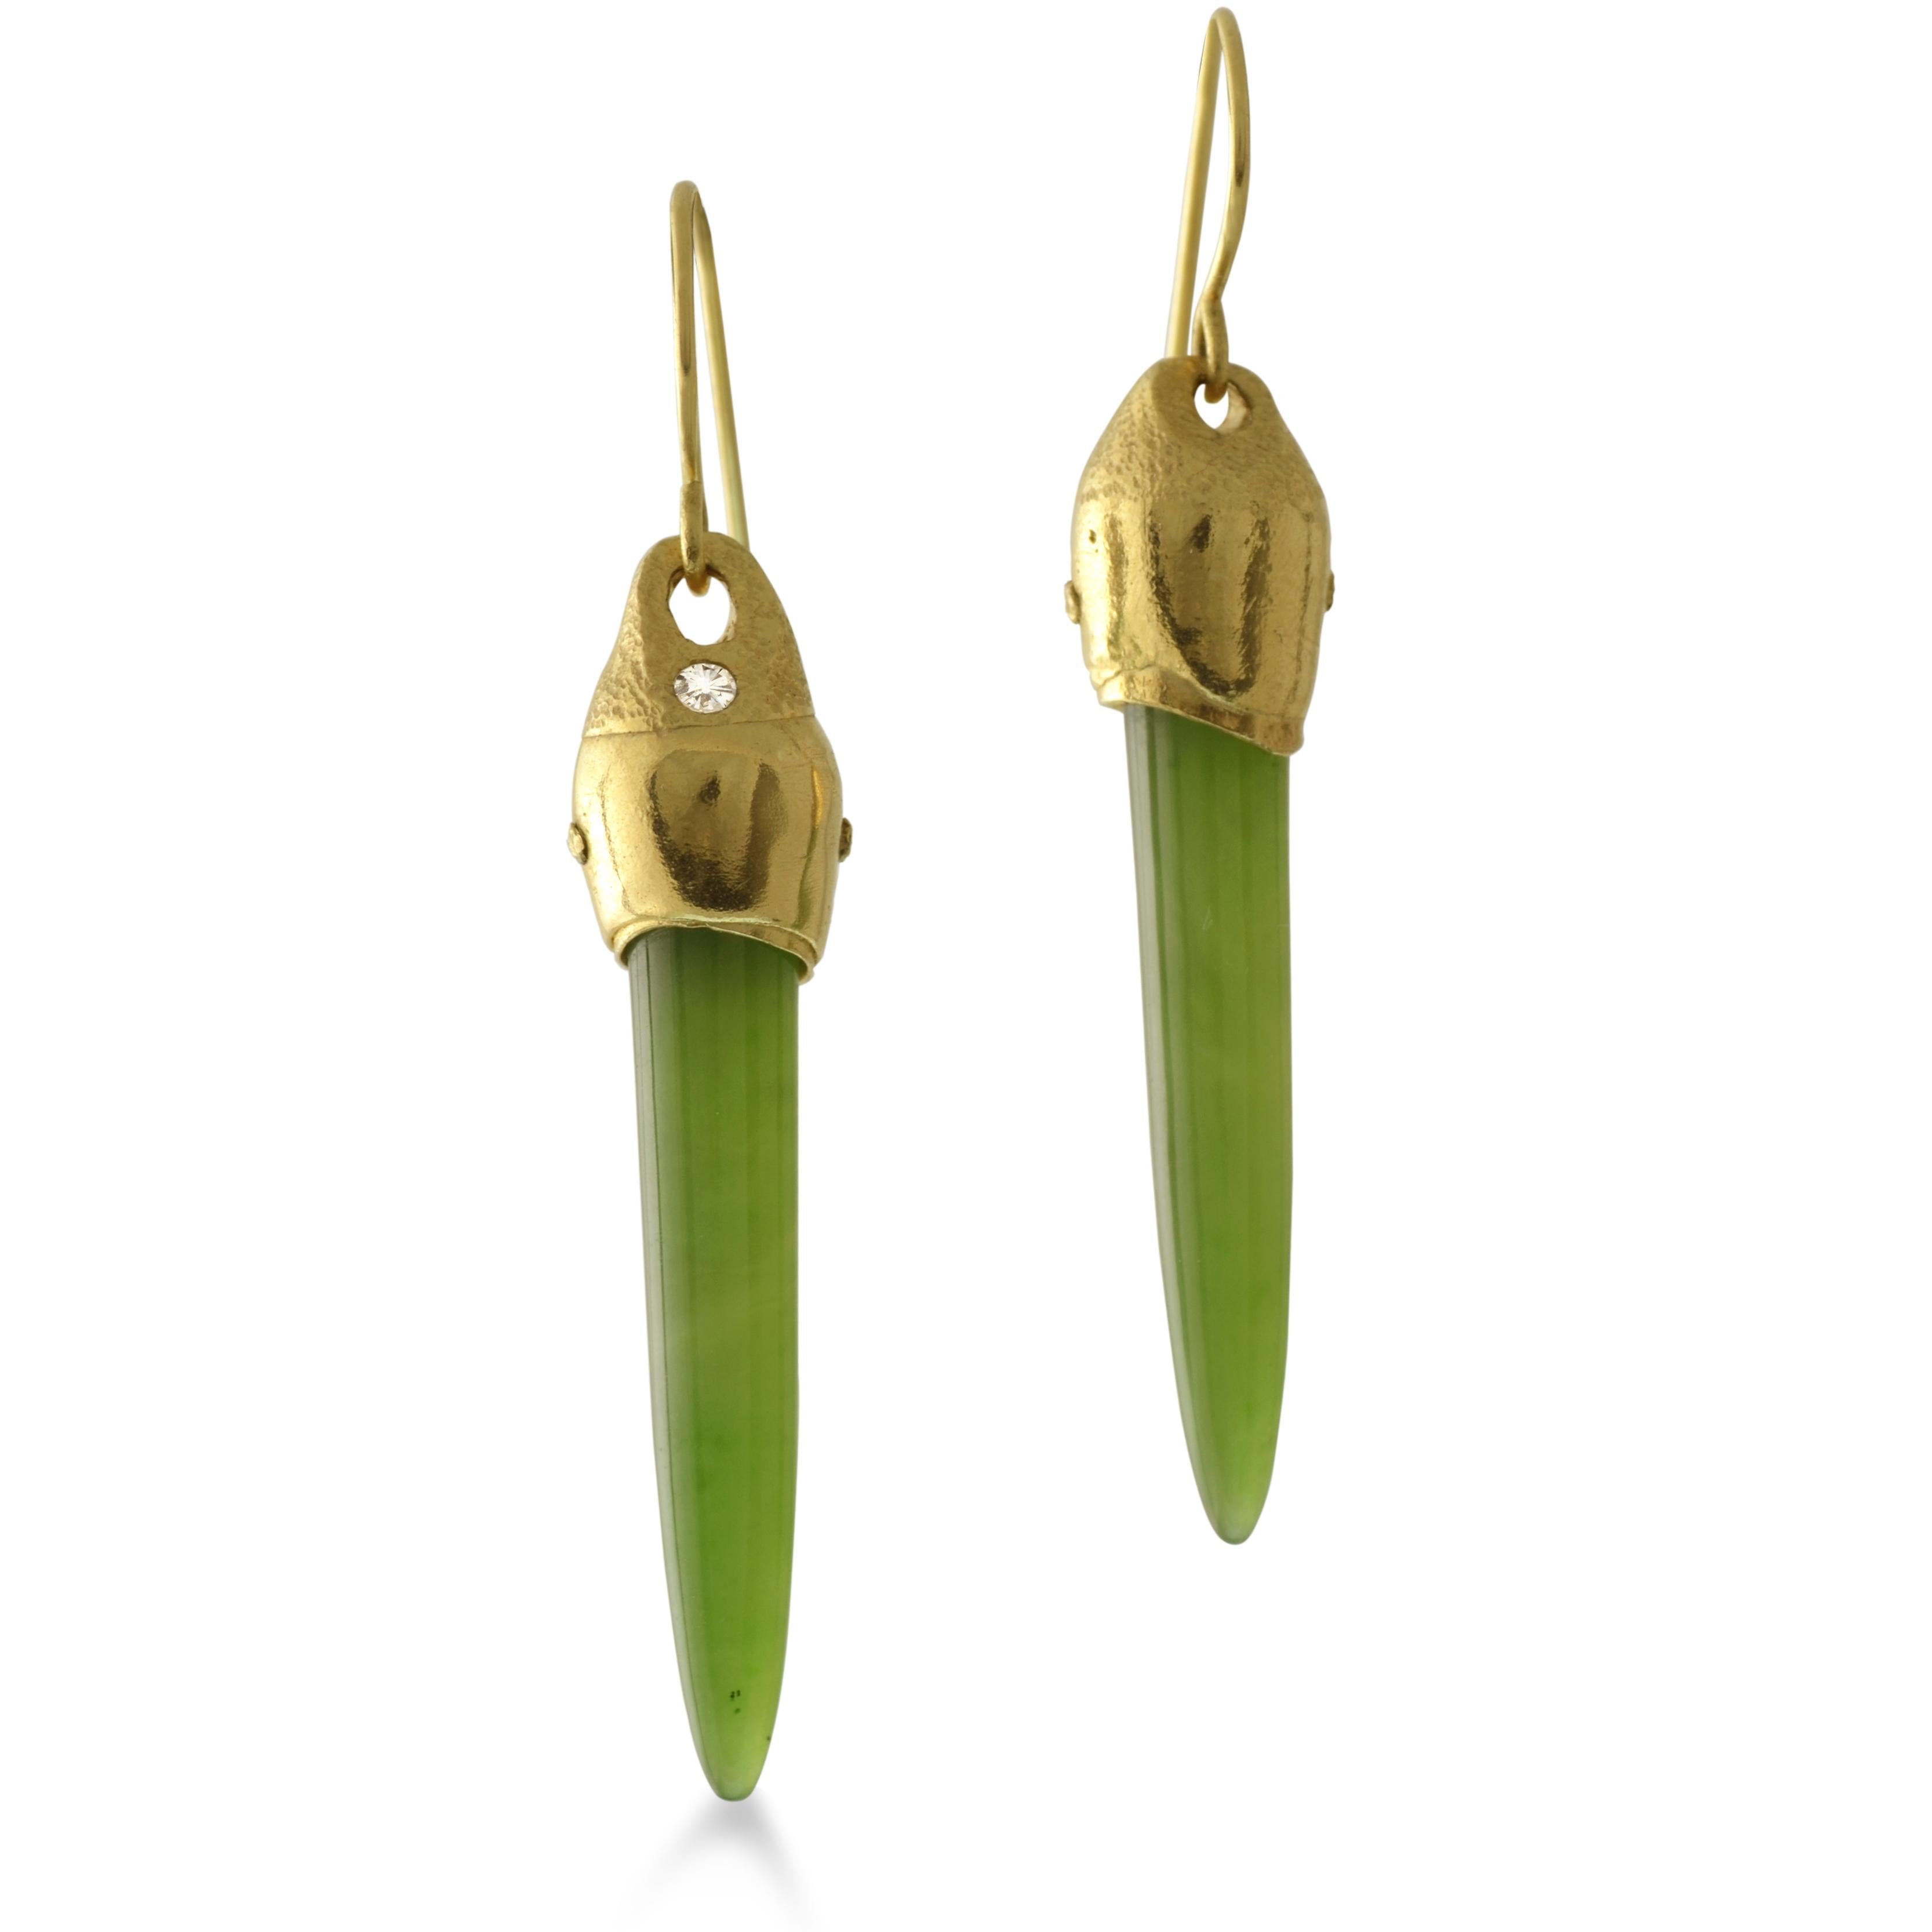 Elongated elegant Nephrites are riveted in our one-of-a-kind 18kt yellow gold earrings. Inspired by textures of bark and composted forest soils. 

Mined and cut in Arizona, these gemmy-green Nephrites are the perfect color to coordinate with what